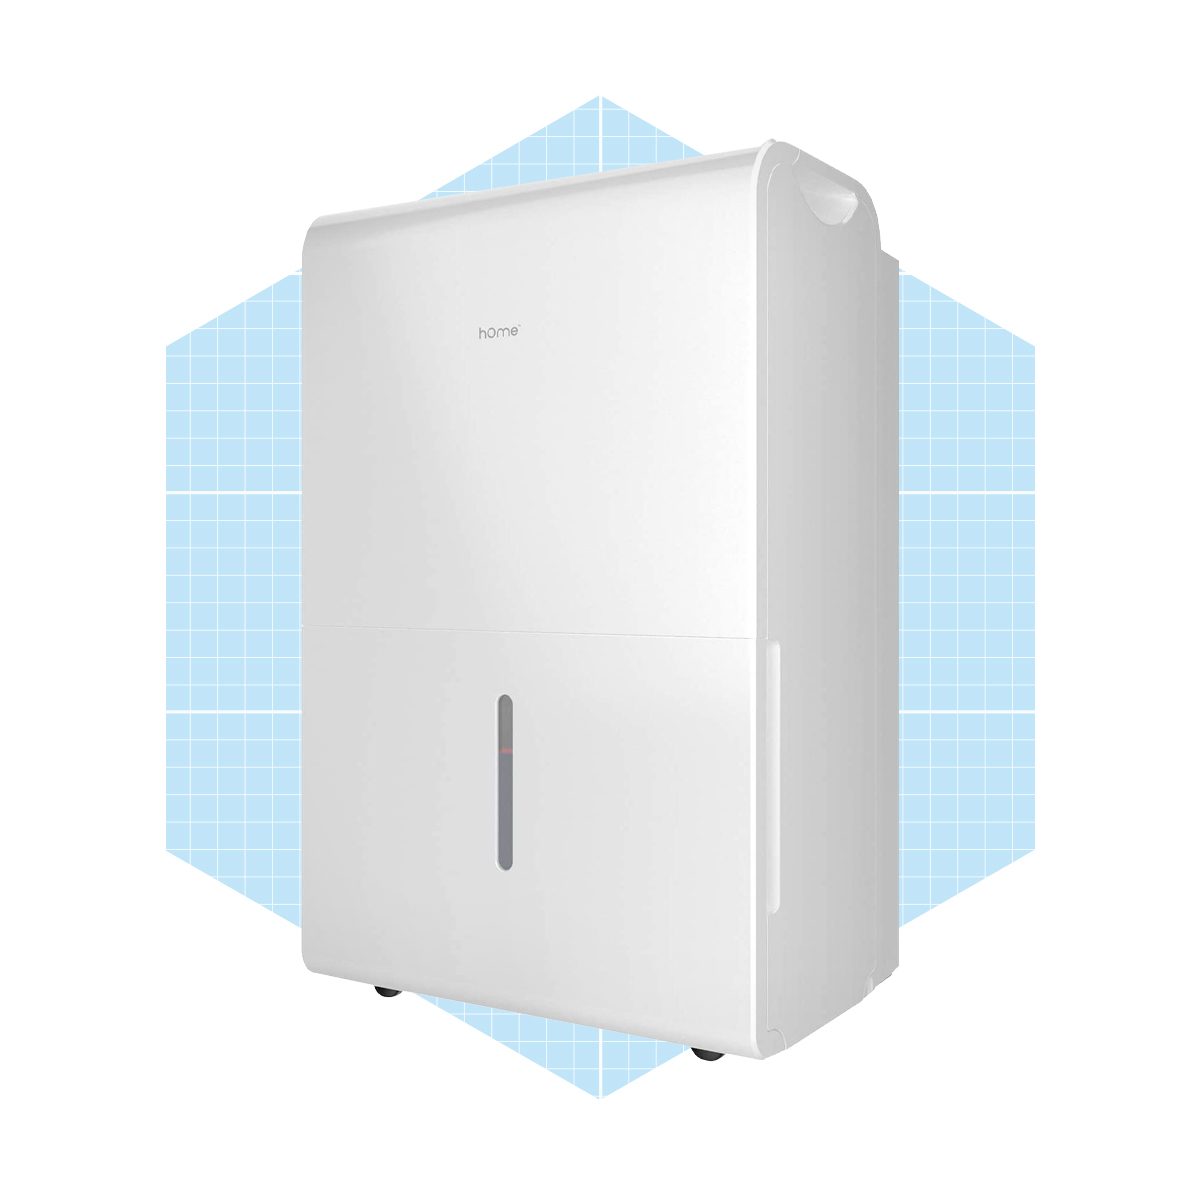 Homelabs 4,500 Sq. Ft Energy Star Dehumidifier With Pump For Extra Large Rooms And Basements Ecomm Amazon.com